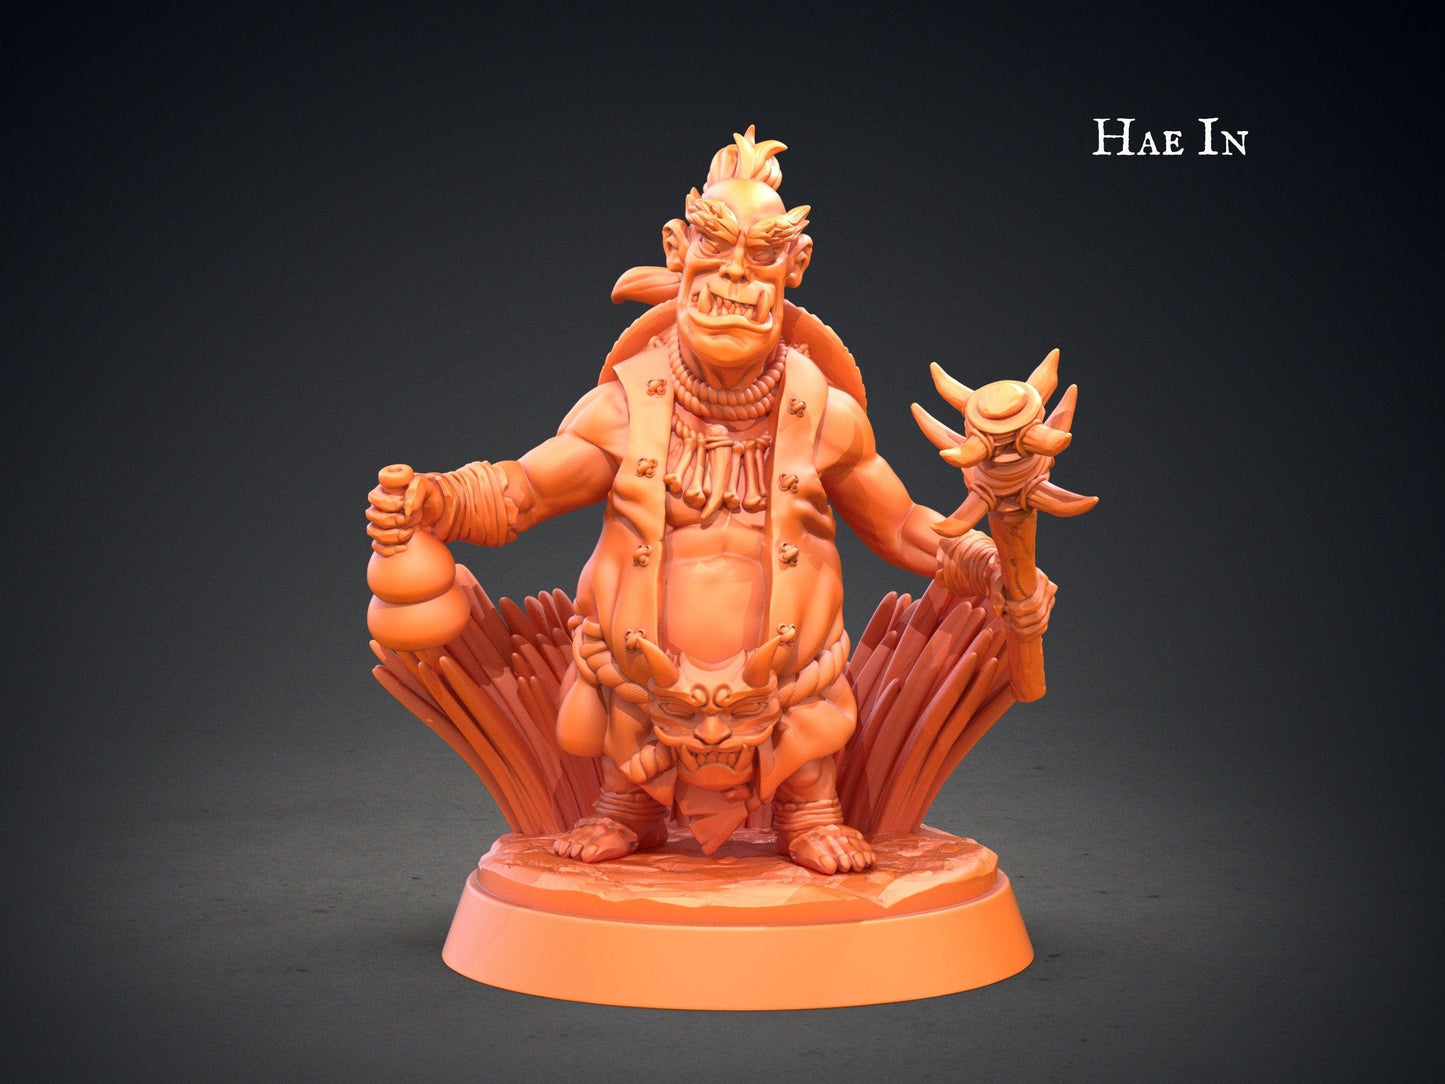 Dokkaebi miniatures | Clay Cyanide | Korean Mythology | Tabletop Gaming | DnD Miniature | Dungeons and Dragons | dnd goblin miniatures - Plague Miniatures shop for DnD Miniatures